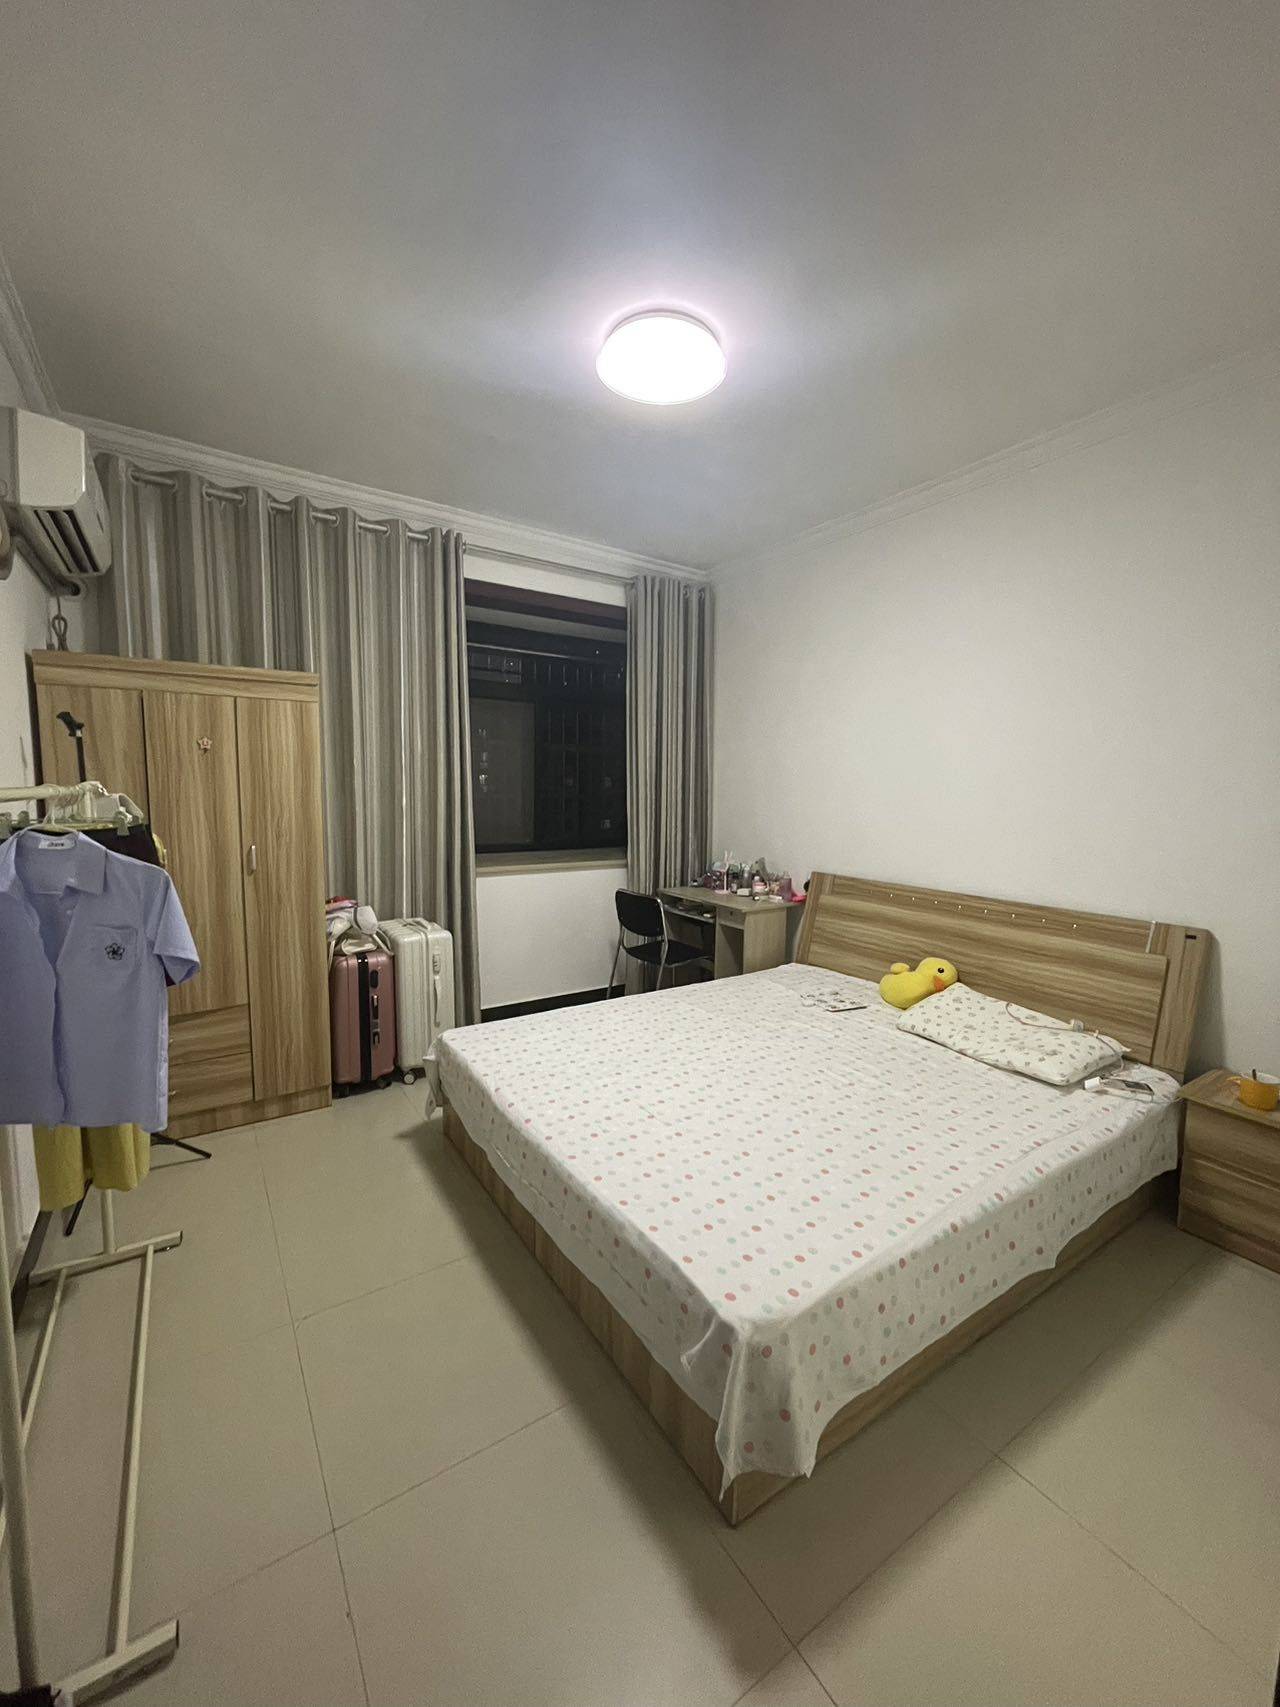 Wuhan-Jiangxia-Cozy Home,Clean&Comfy,No Gender Limit,Hustle & Bustle,“Friends”,Chilled